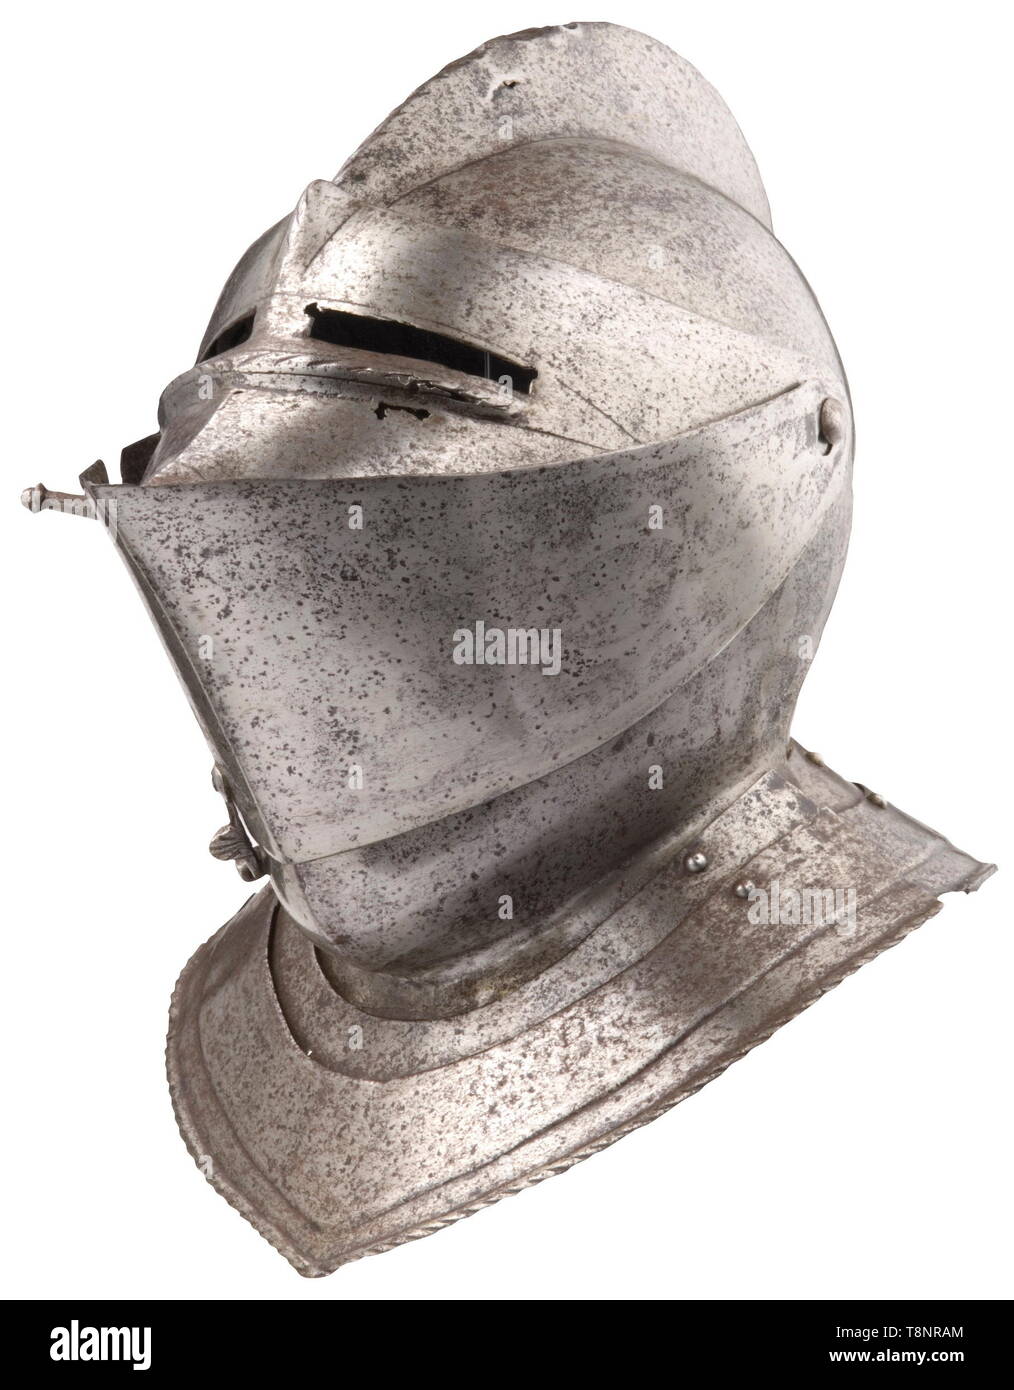 An English close helmet, circa 1570 Old assembled helmet with the skull forged in one piece, and a high, corded crest (ca. 1 cm large defect). Two-piece visor, opening upward. Separate eye slits with corded flanges on the underside. Small defects on the left side. Repairs to the point of the visor. The bevor has the two original hook latches, with grips chiselled in the shape of shells. Two riveted neck lames repaired in several places. The upper one restored at the nape. Height 29 cm. Provenance: Hermann Historica, auction 52, 4 May 2007, lot 36, Additional-Rights-Clearance-Info-Not-Available Stock Photo